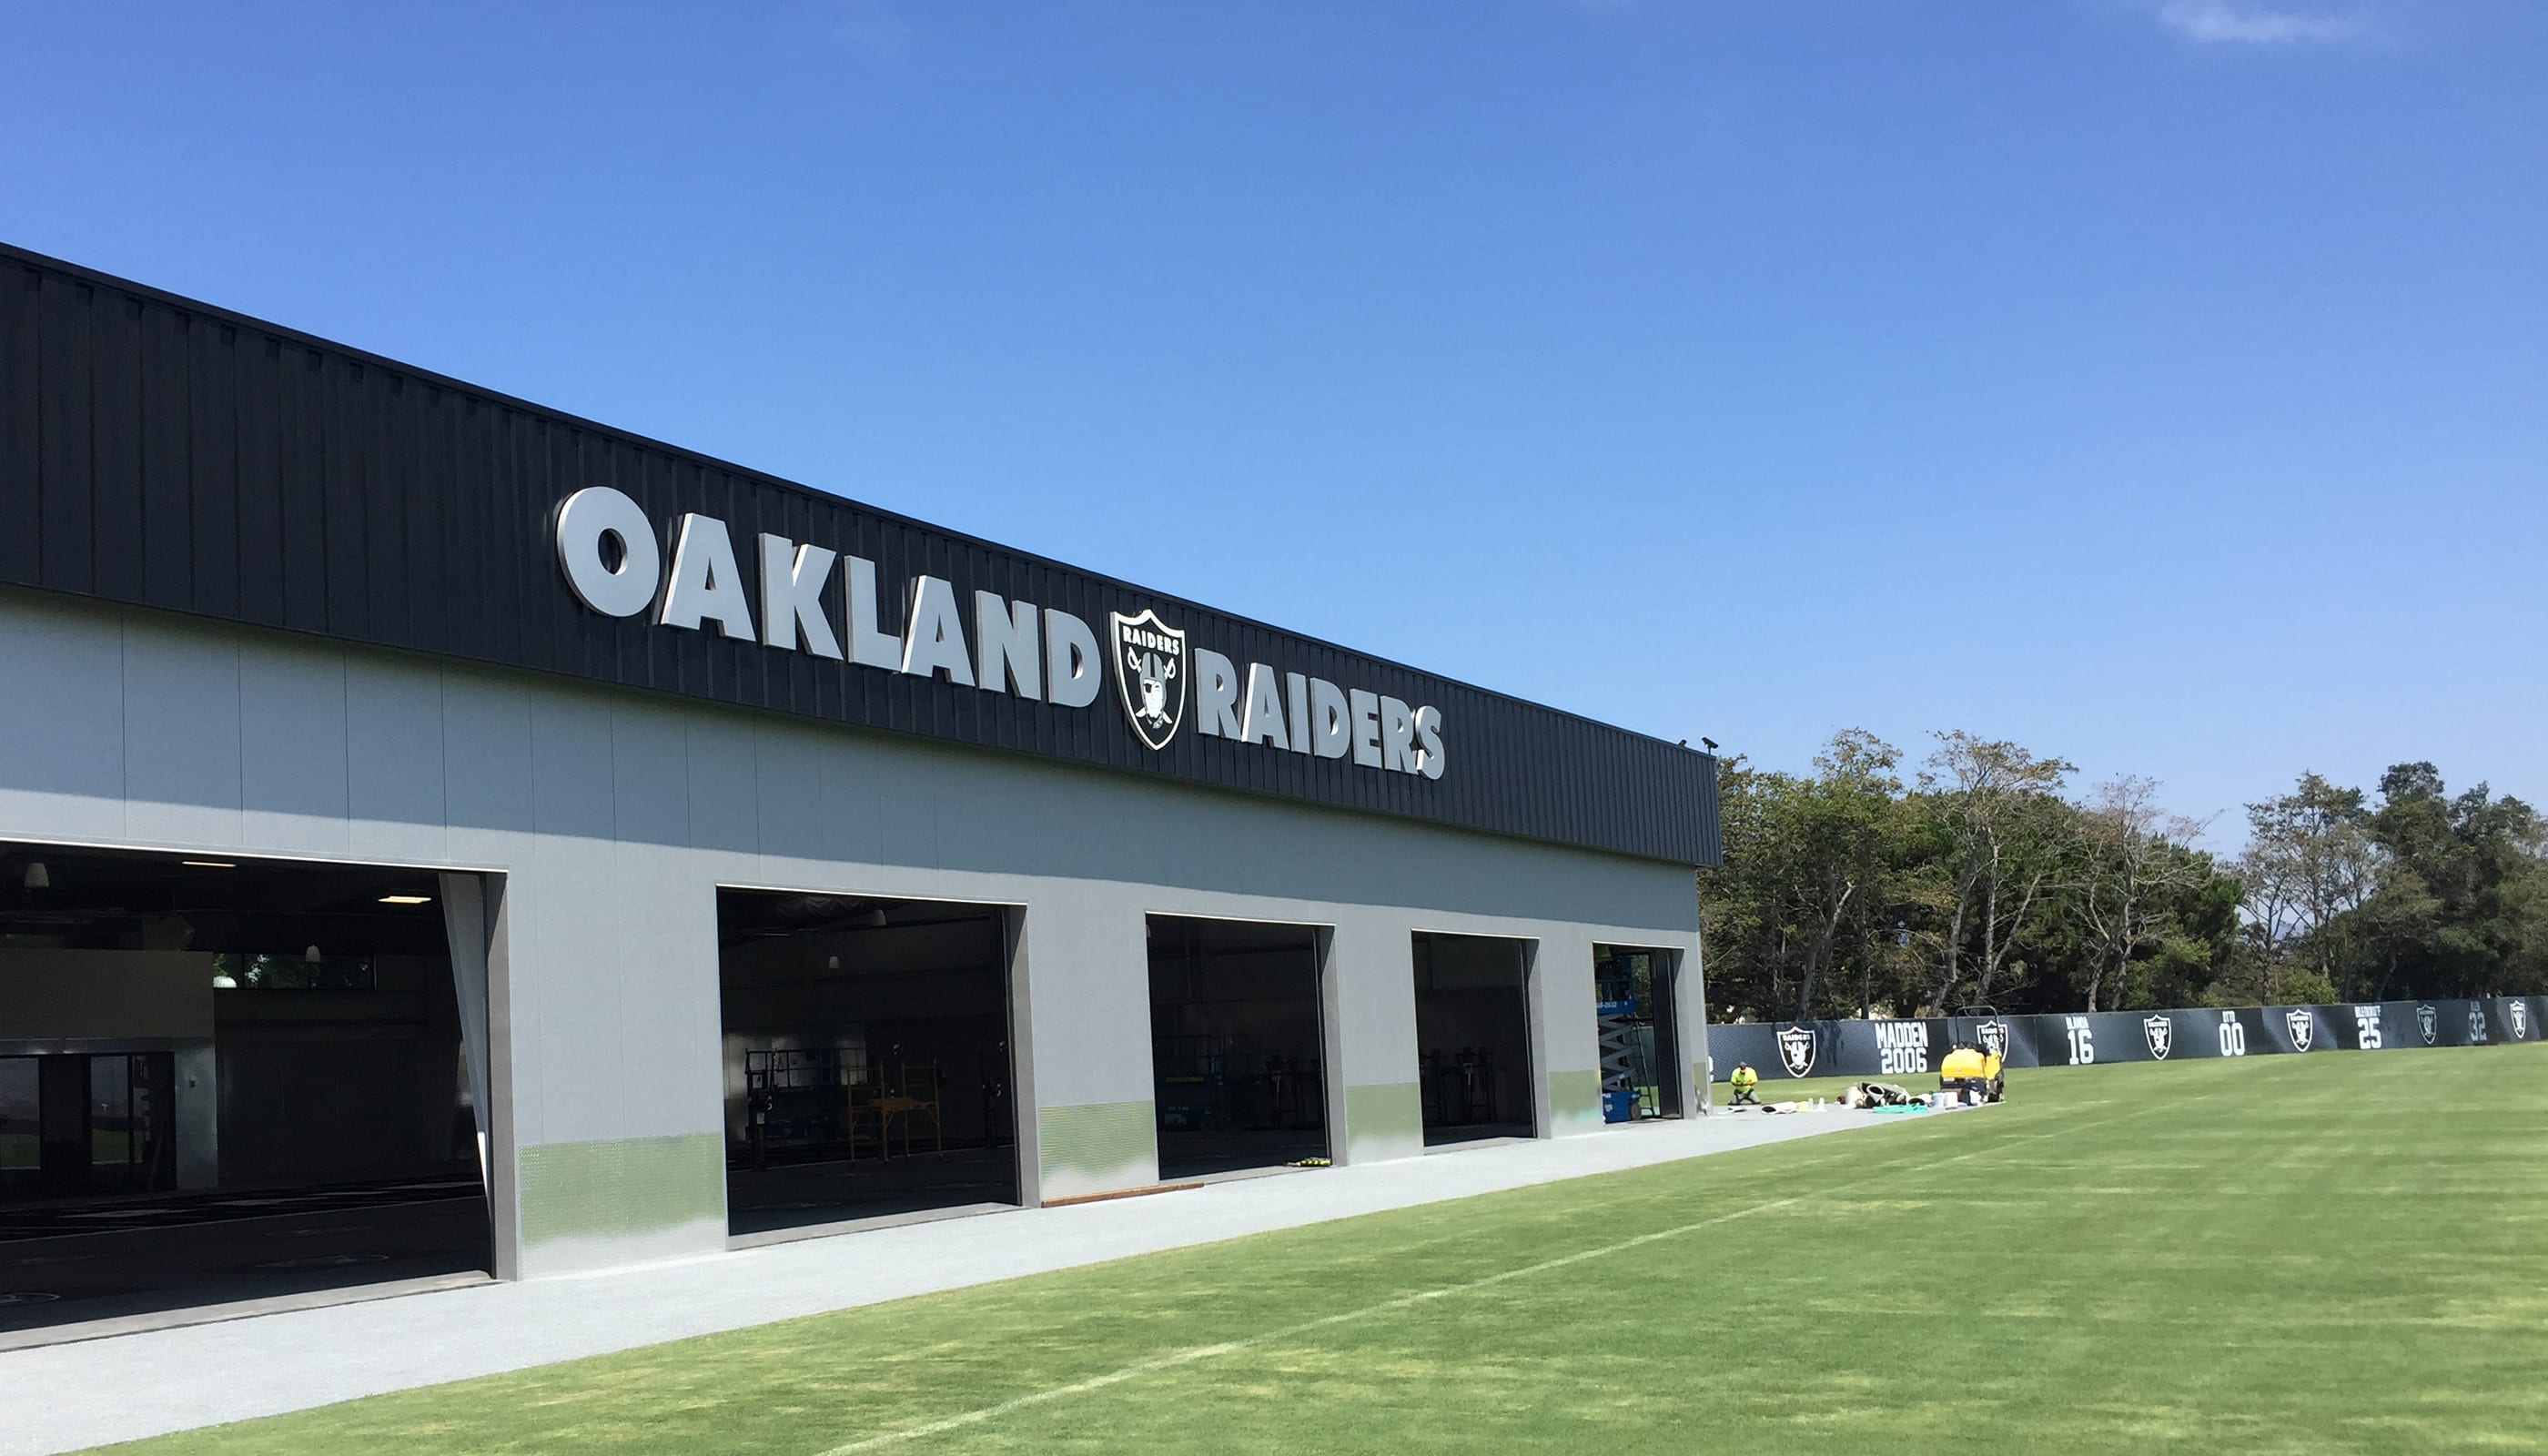 Oakland Raiders Practice Facility - Commercial Architecture